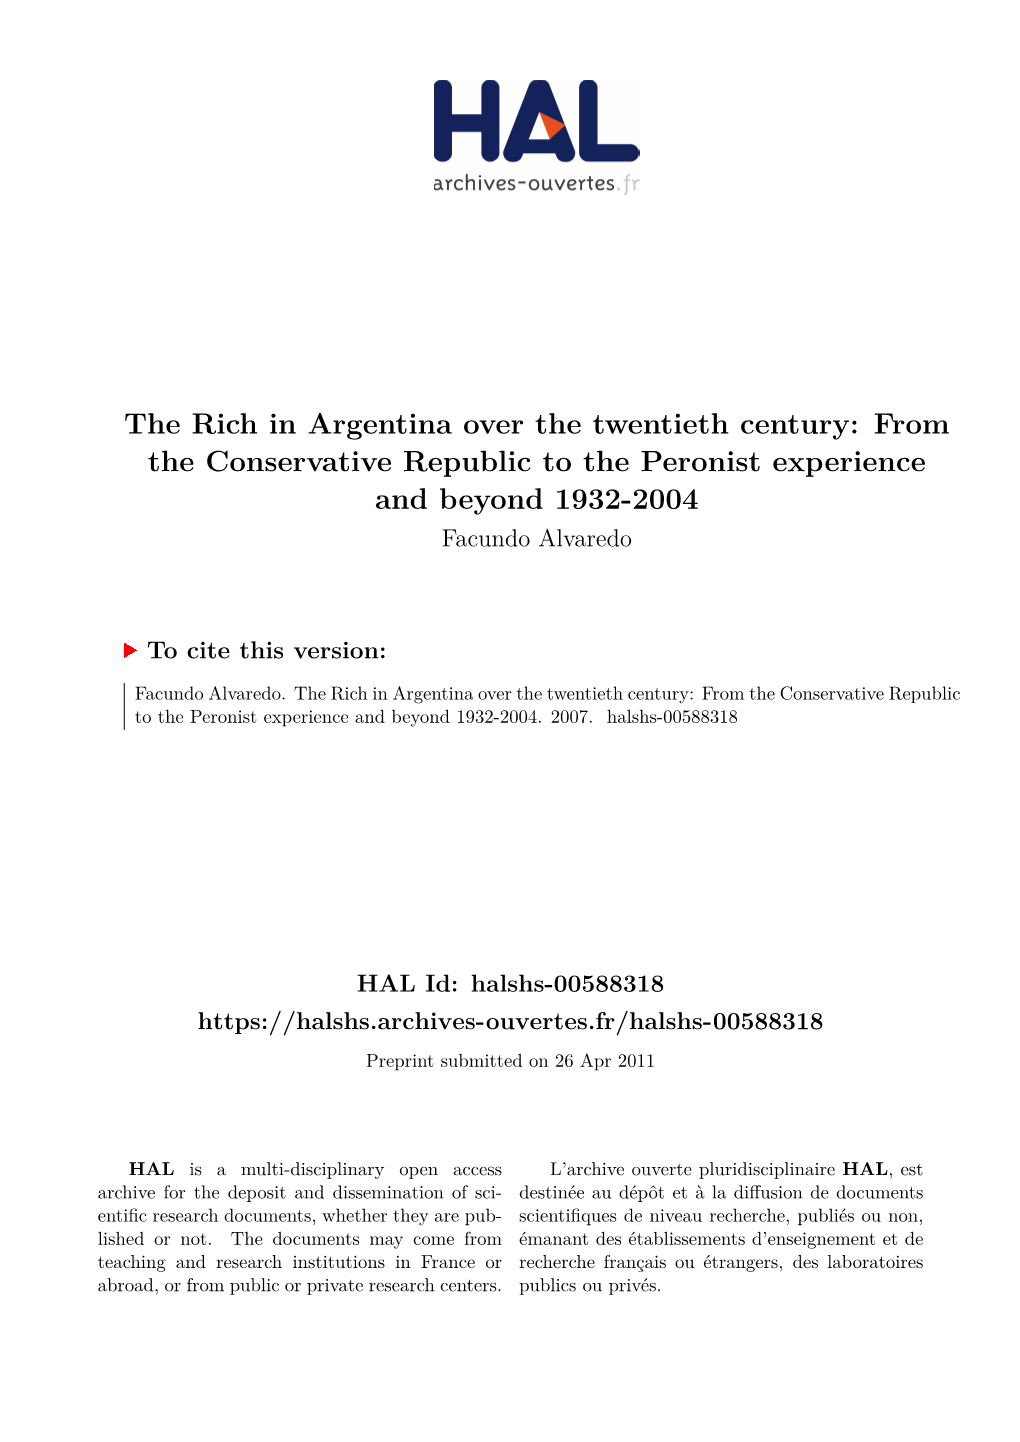 The Rich in Argentina Over the Twentieth Century: from the Conservative Republic to the Peronist Experience and Beyond 1932-2004 Facundo Alvaredo